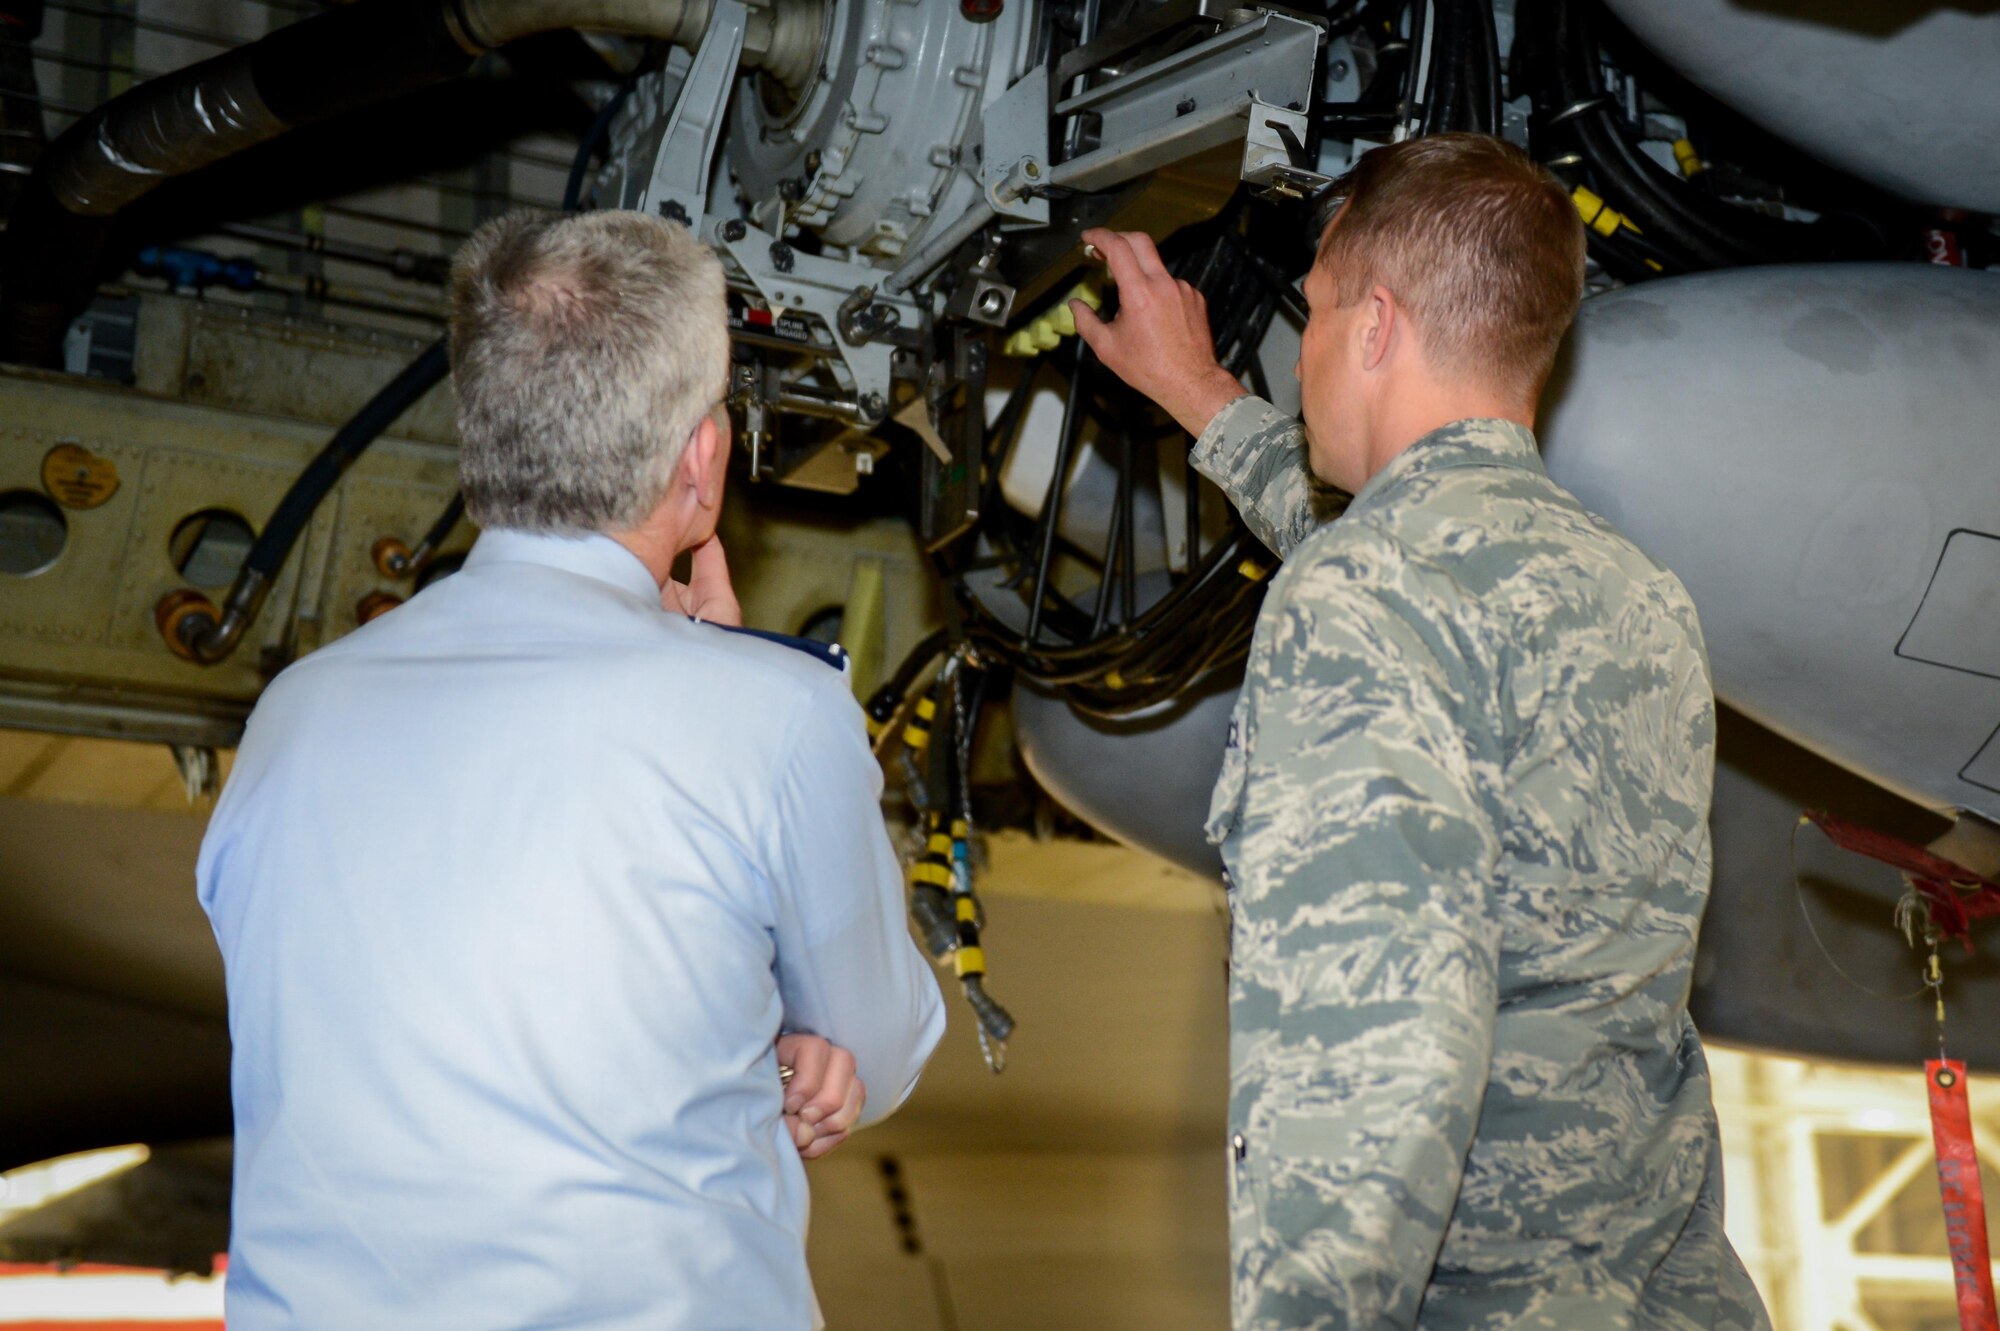 Gen. Paul J. Selva, vice chairman of the Joint Chiefs of Staff, and Col. Ty Neuman, 2nd Bomb Wing commander, observe a munitions connection on a B-52 Stratofortress at Barksdale Air Force Base, La., May 1, 2017. As part of the tour, 2nd Bomb Wing leadership delivered a briefing to Selva describing the unit’s mission and accomplishments. During the tour Selva also met with Barksdale’s senior leadership to discuss the importance of the nuclear enterprise and thank the Airmen at Barksdale for the role they play in the U.S. deterrence mission. (U.S. Air Force photo/Senior Airman Mozer O. Da Cunha)